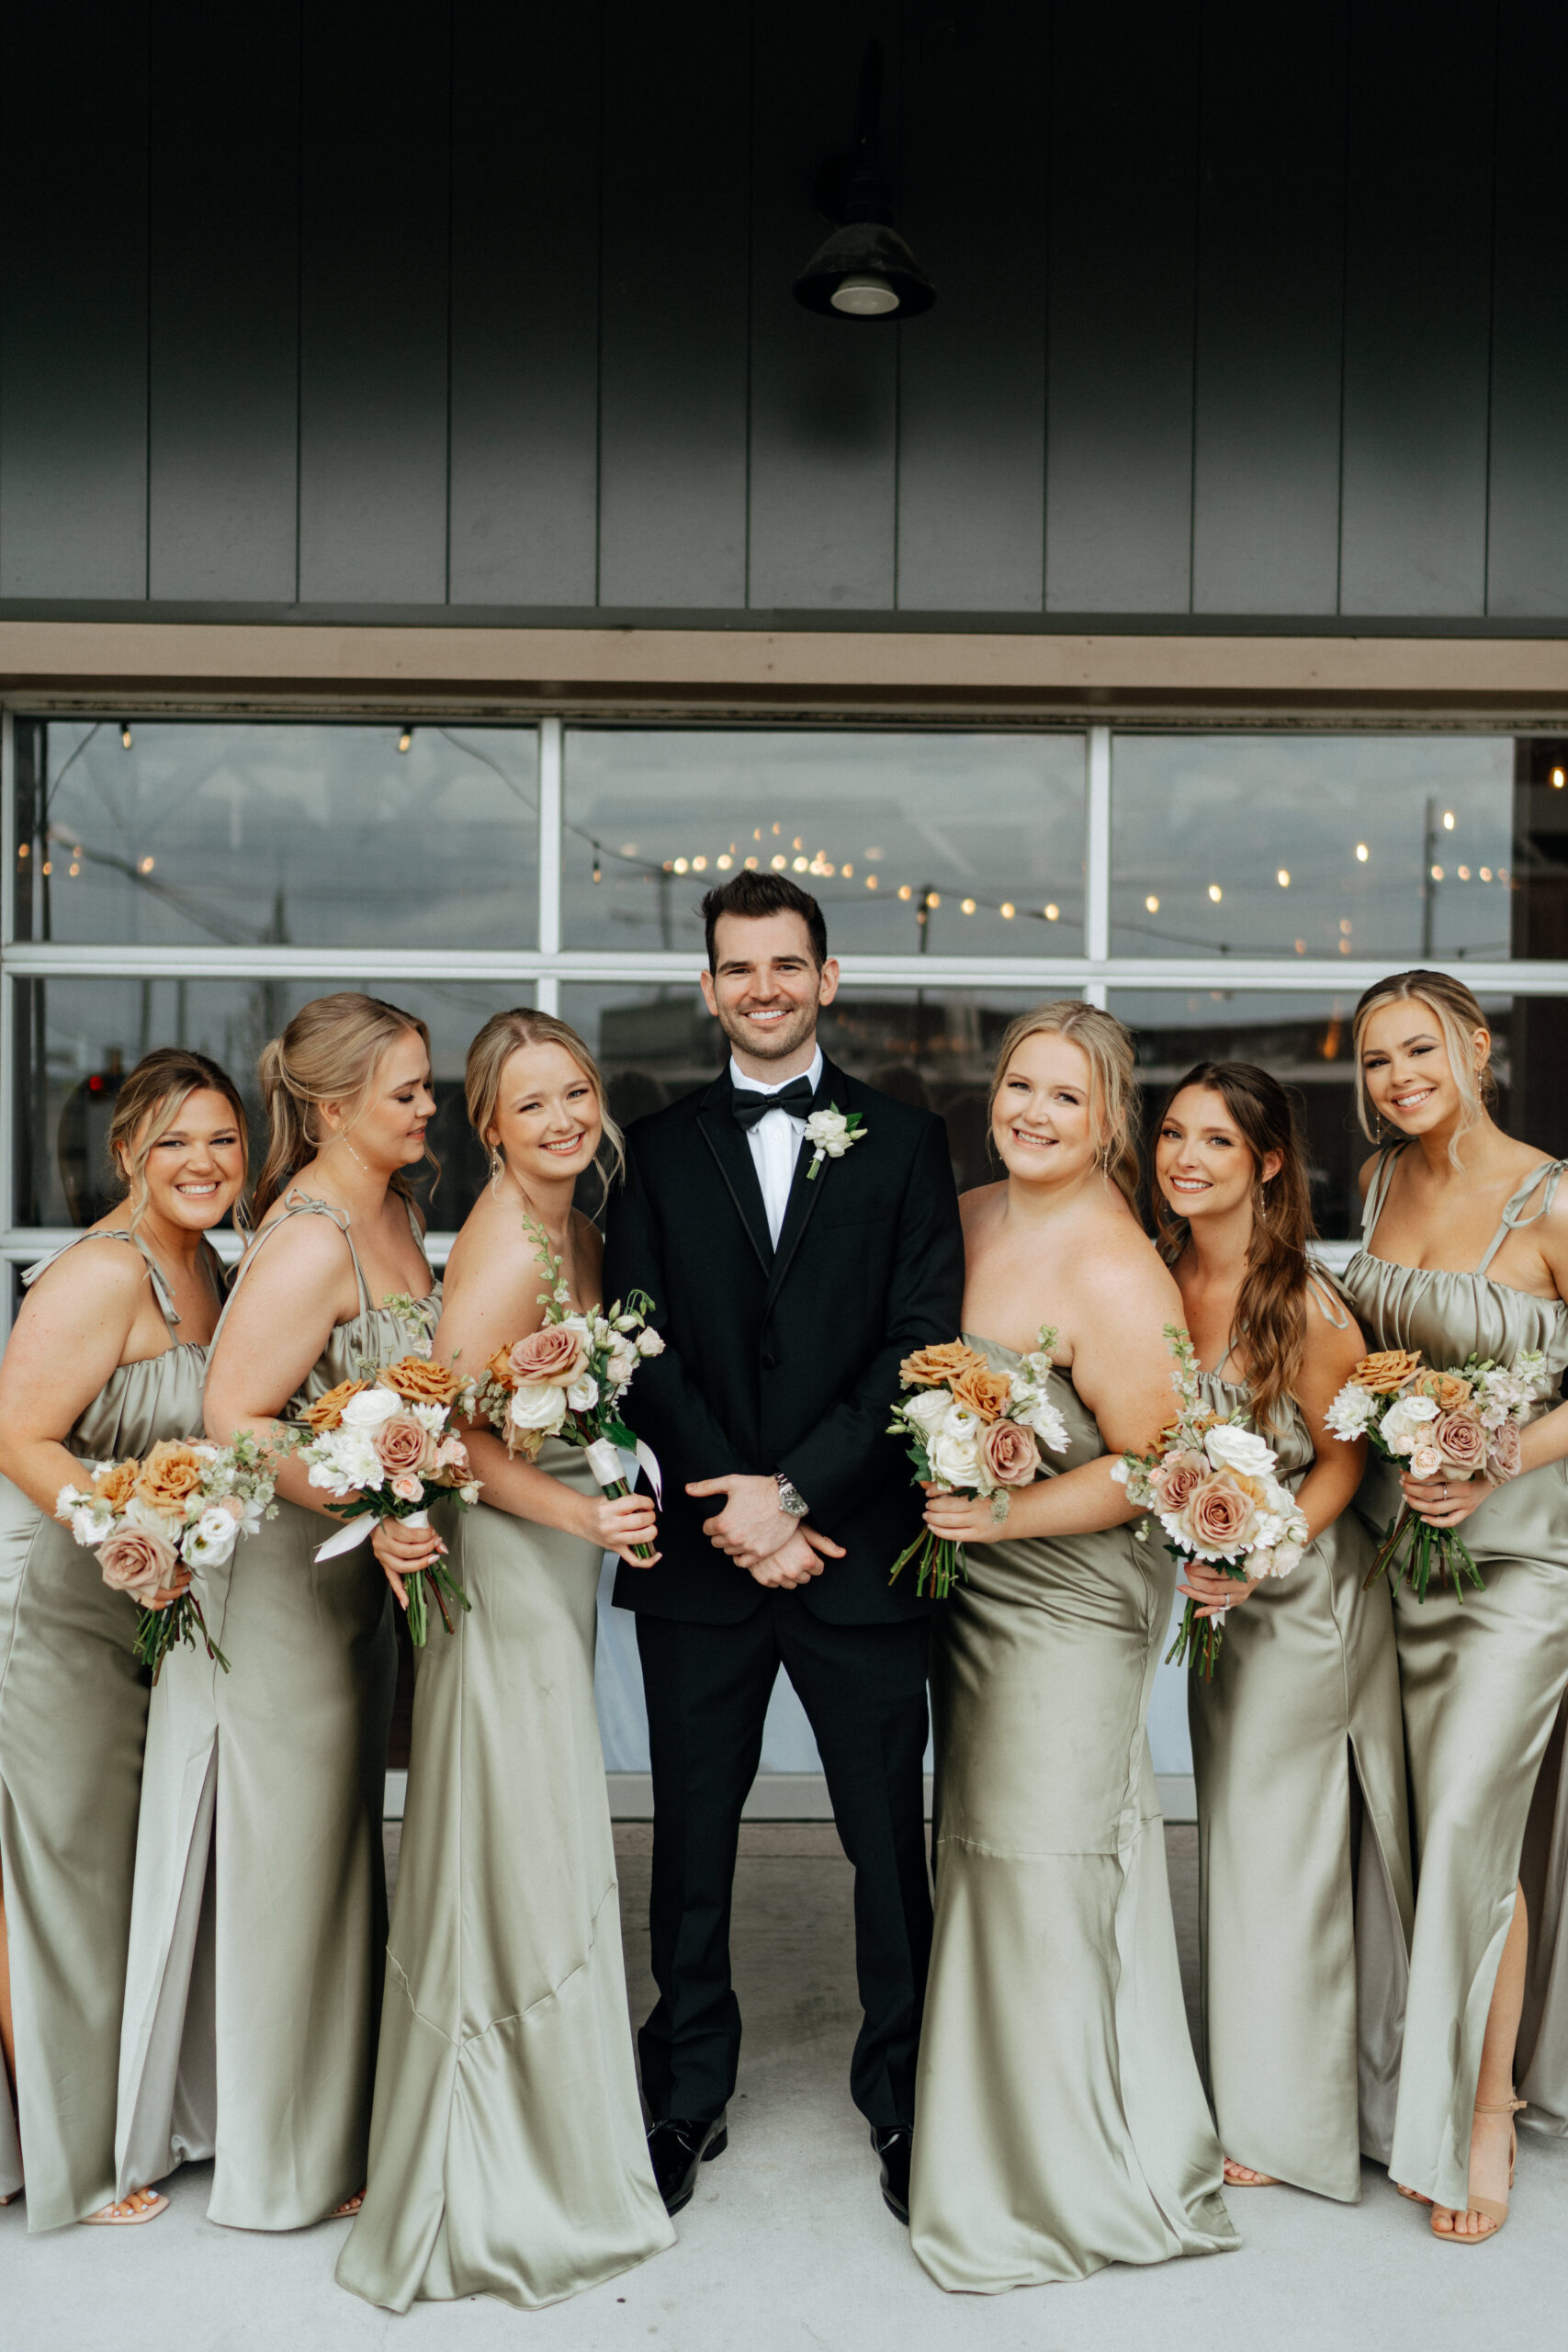 Groom with bridesmaids taking pictures on her wedding day at 14TENN in Nashville, TN